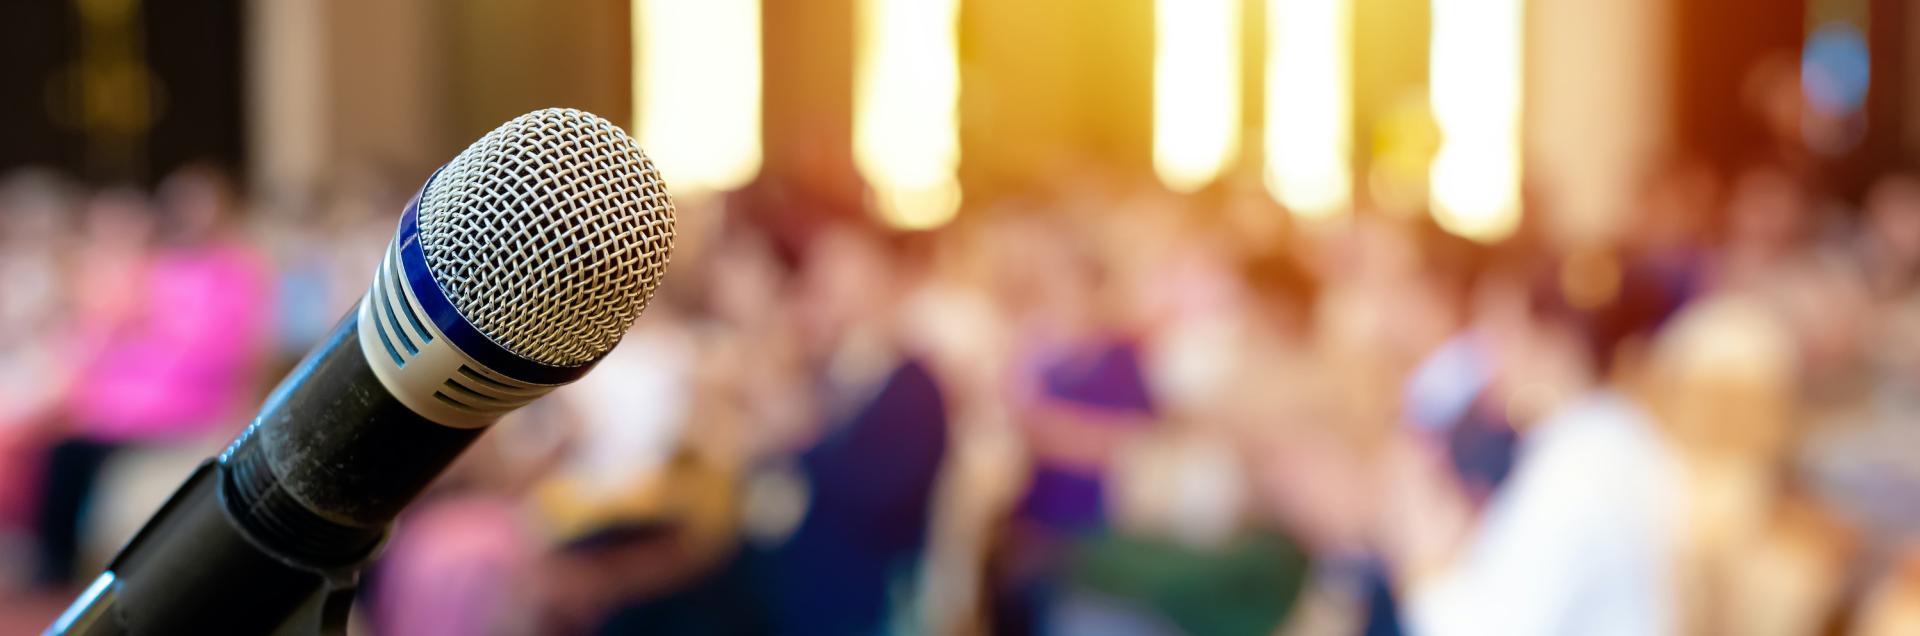 Close up of a microphone on stage with a blurred audience